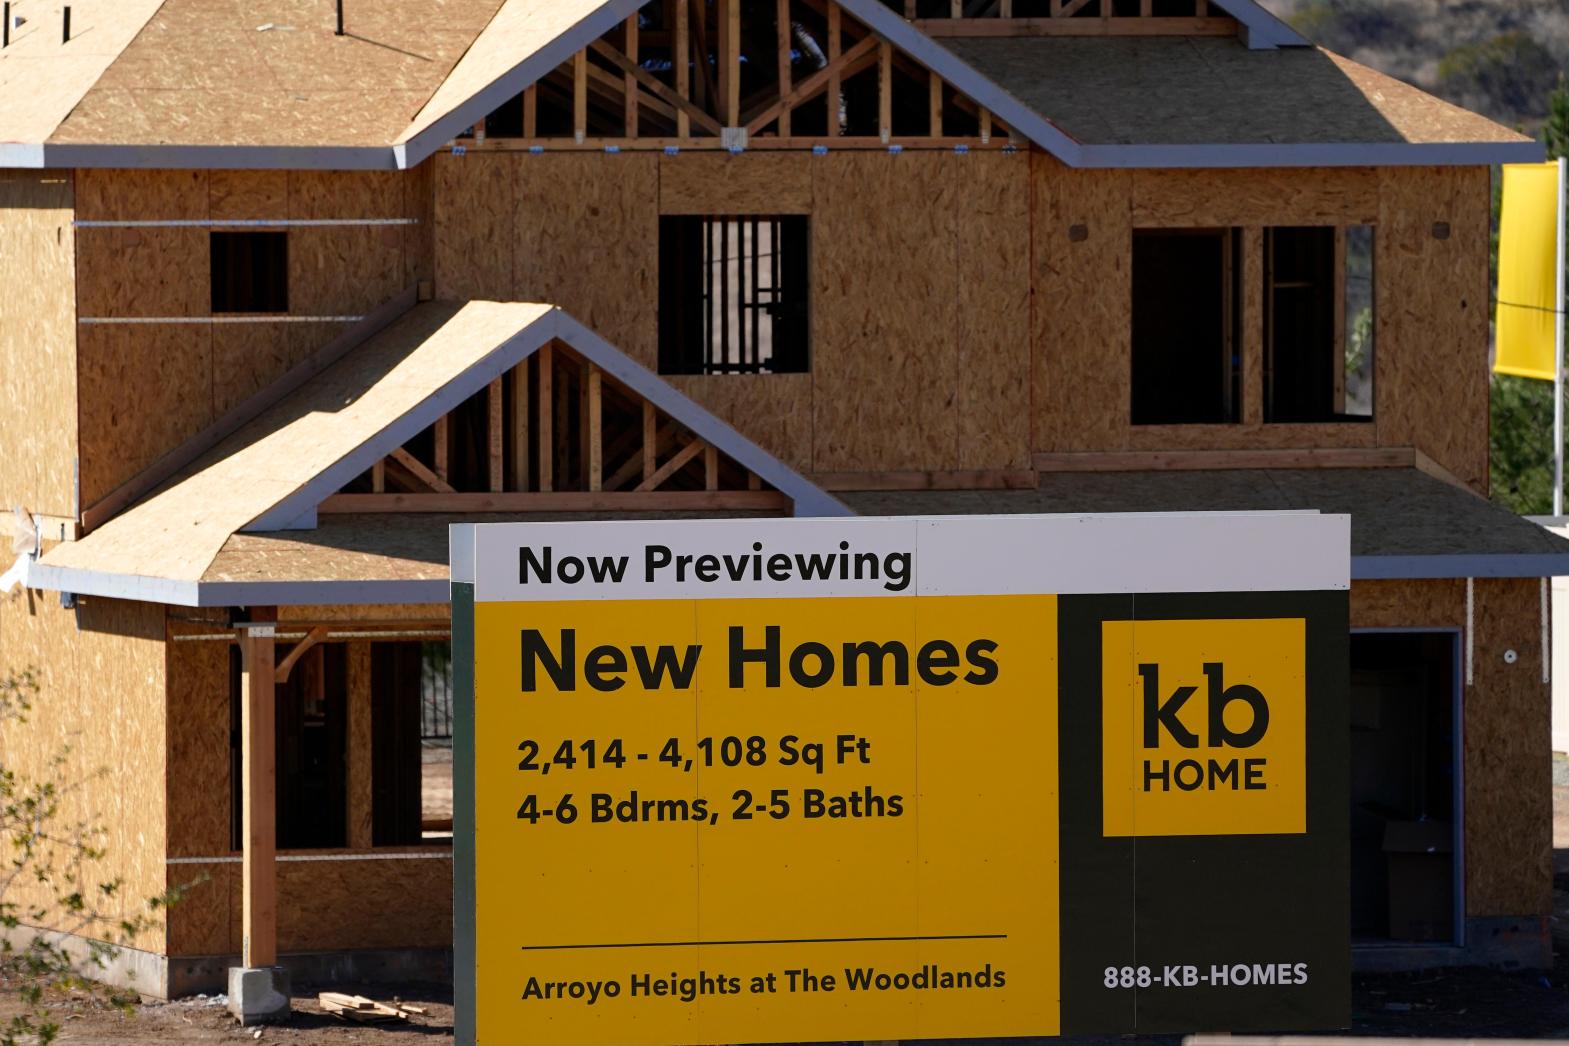 Homebuilders grapple with land shortage, soaring lumber costs